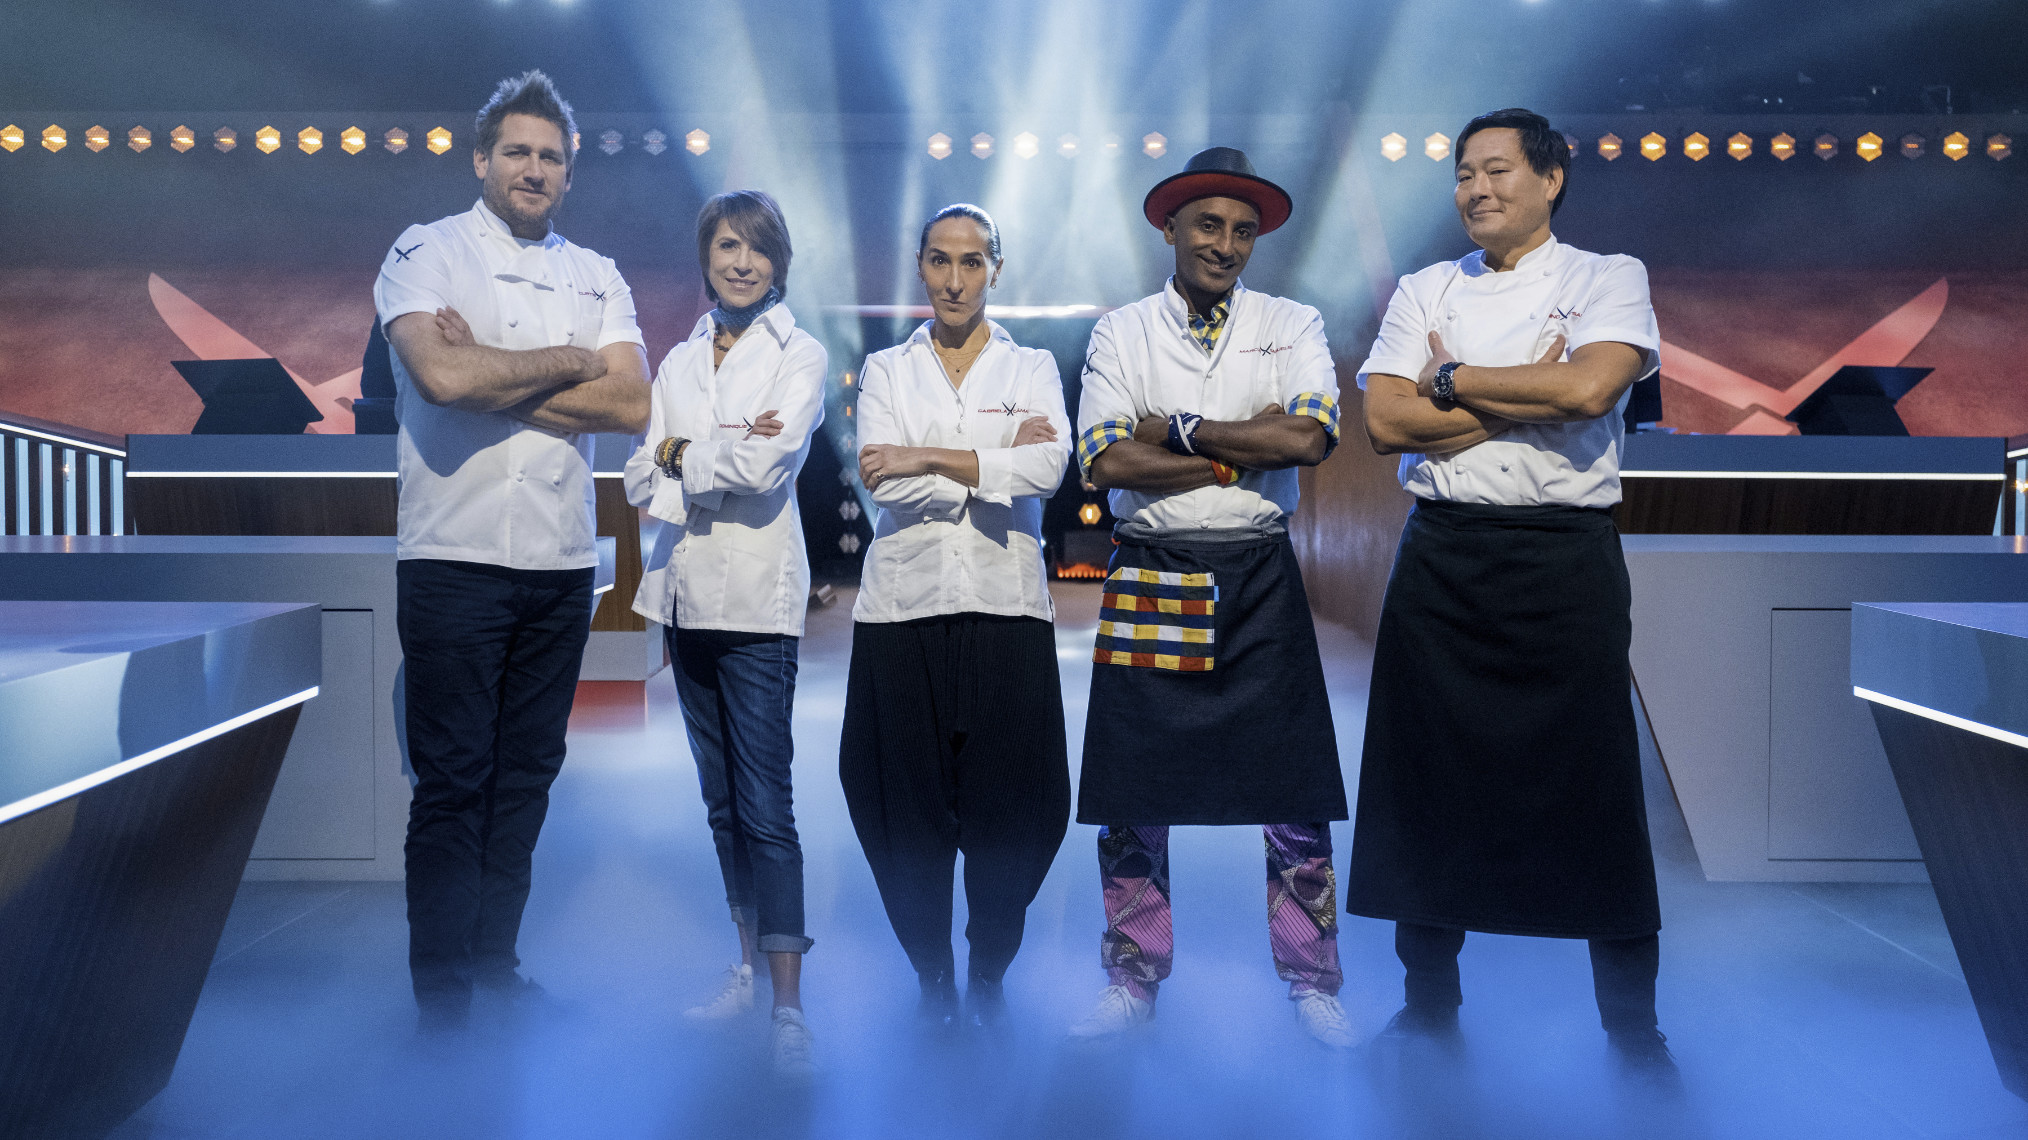 Who Are the Chefs of Netflix's 'Iron Chef Quest for an Iron Legend'?